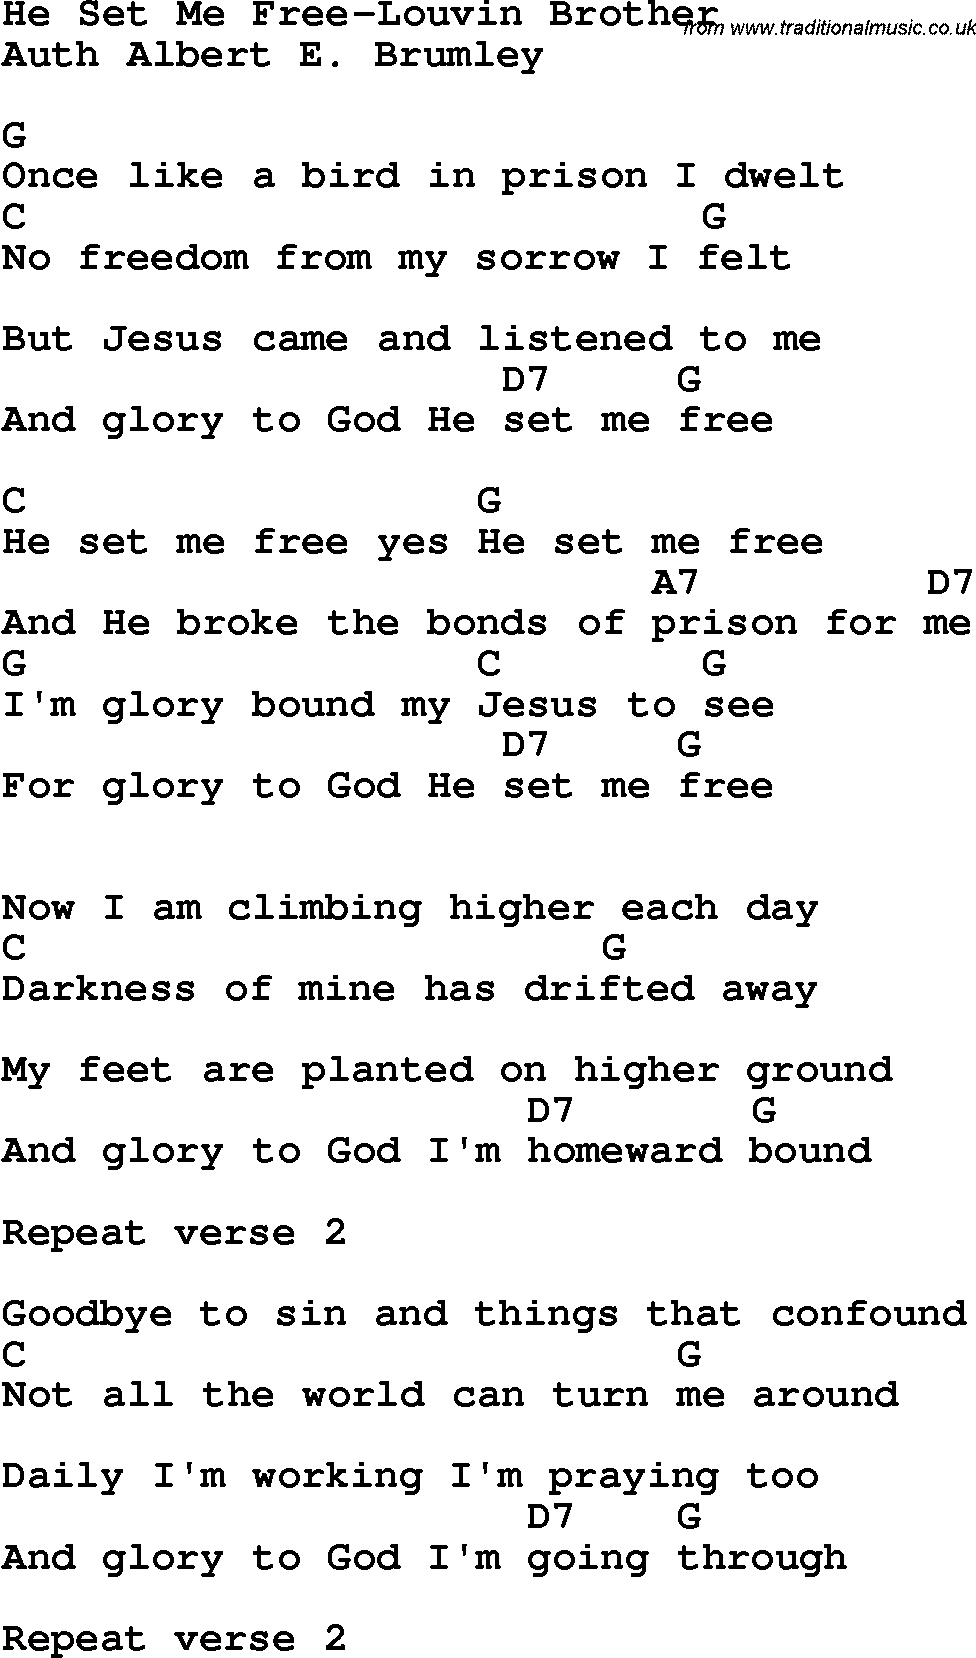 Country, Southern and Bluegrass Gospel Song He Set Me Free-Louvin Brother lyrics and chords